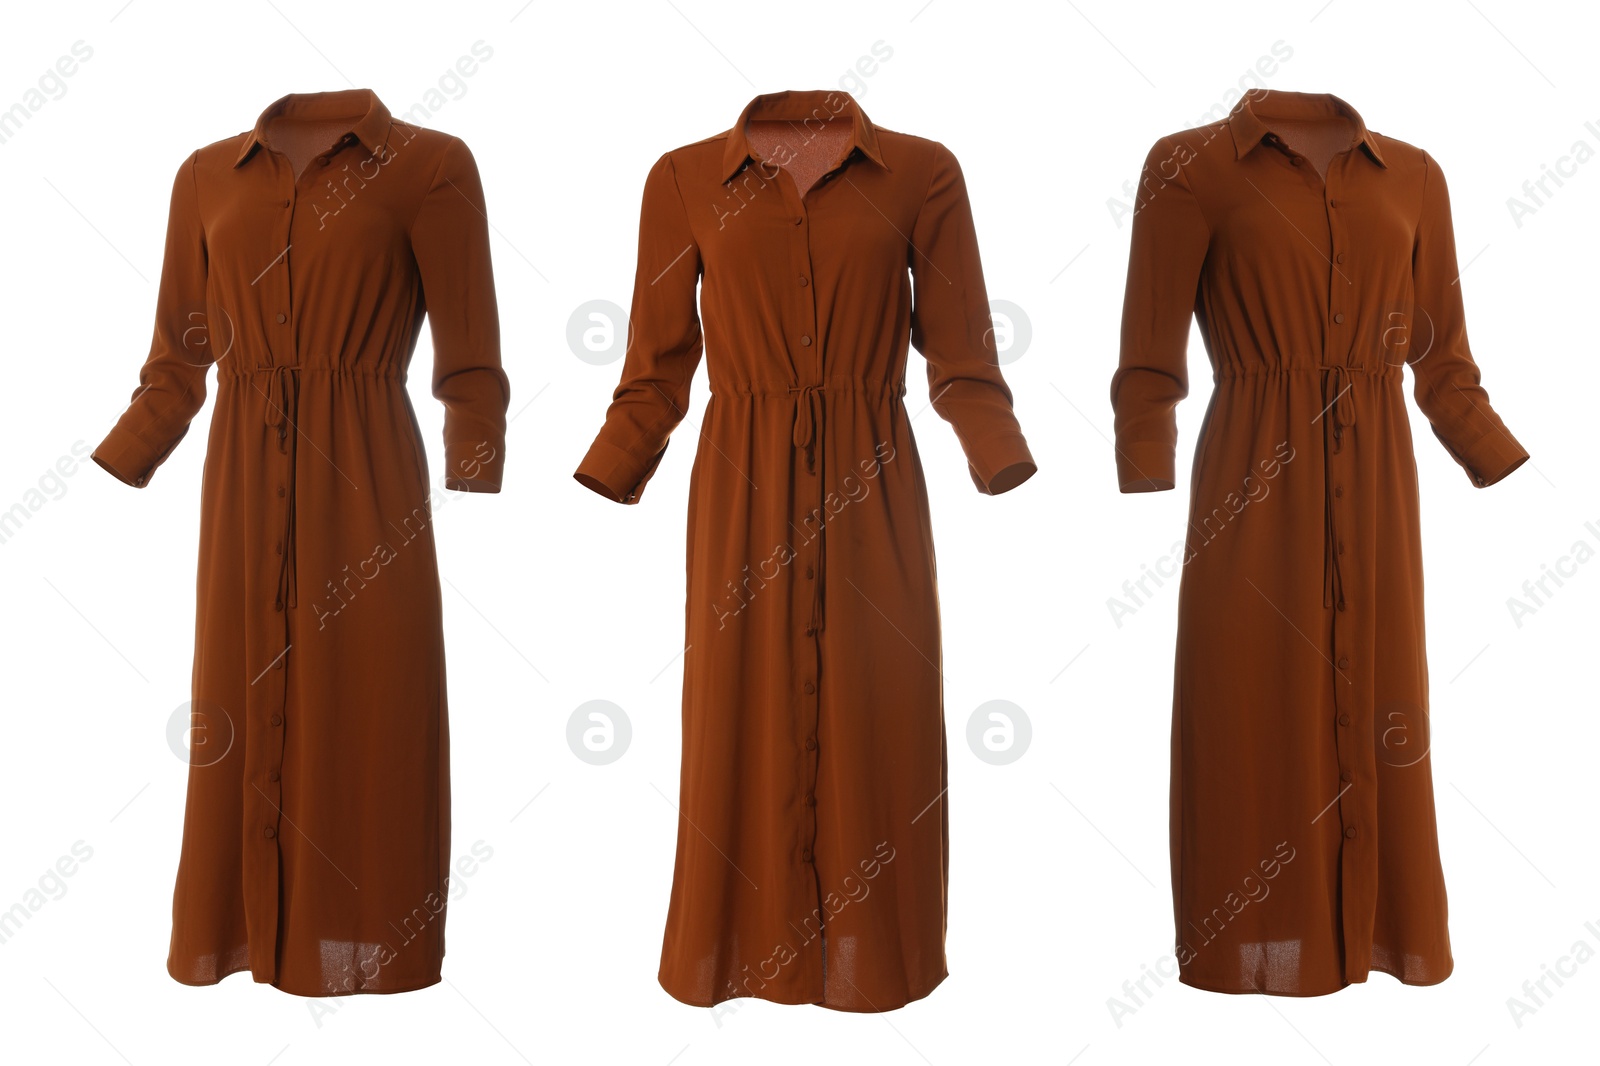 Image of Set of stylish long dresses from different views on white background